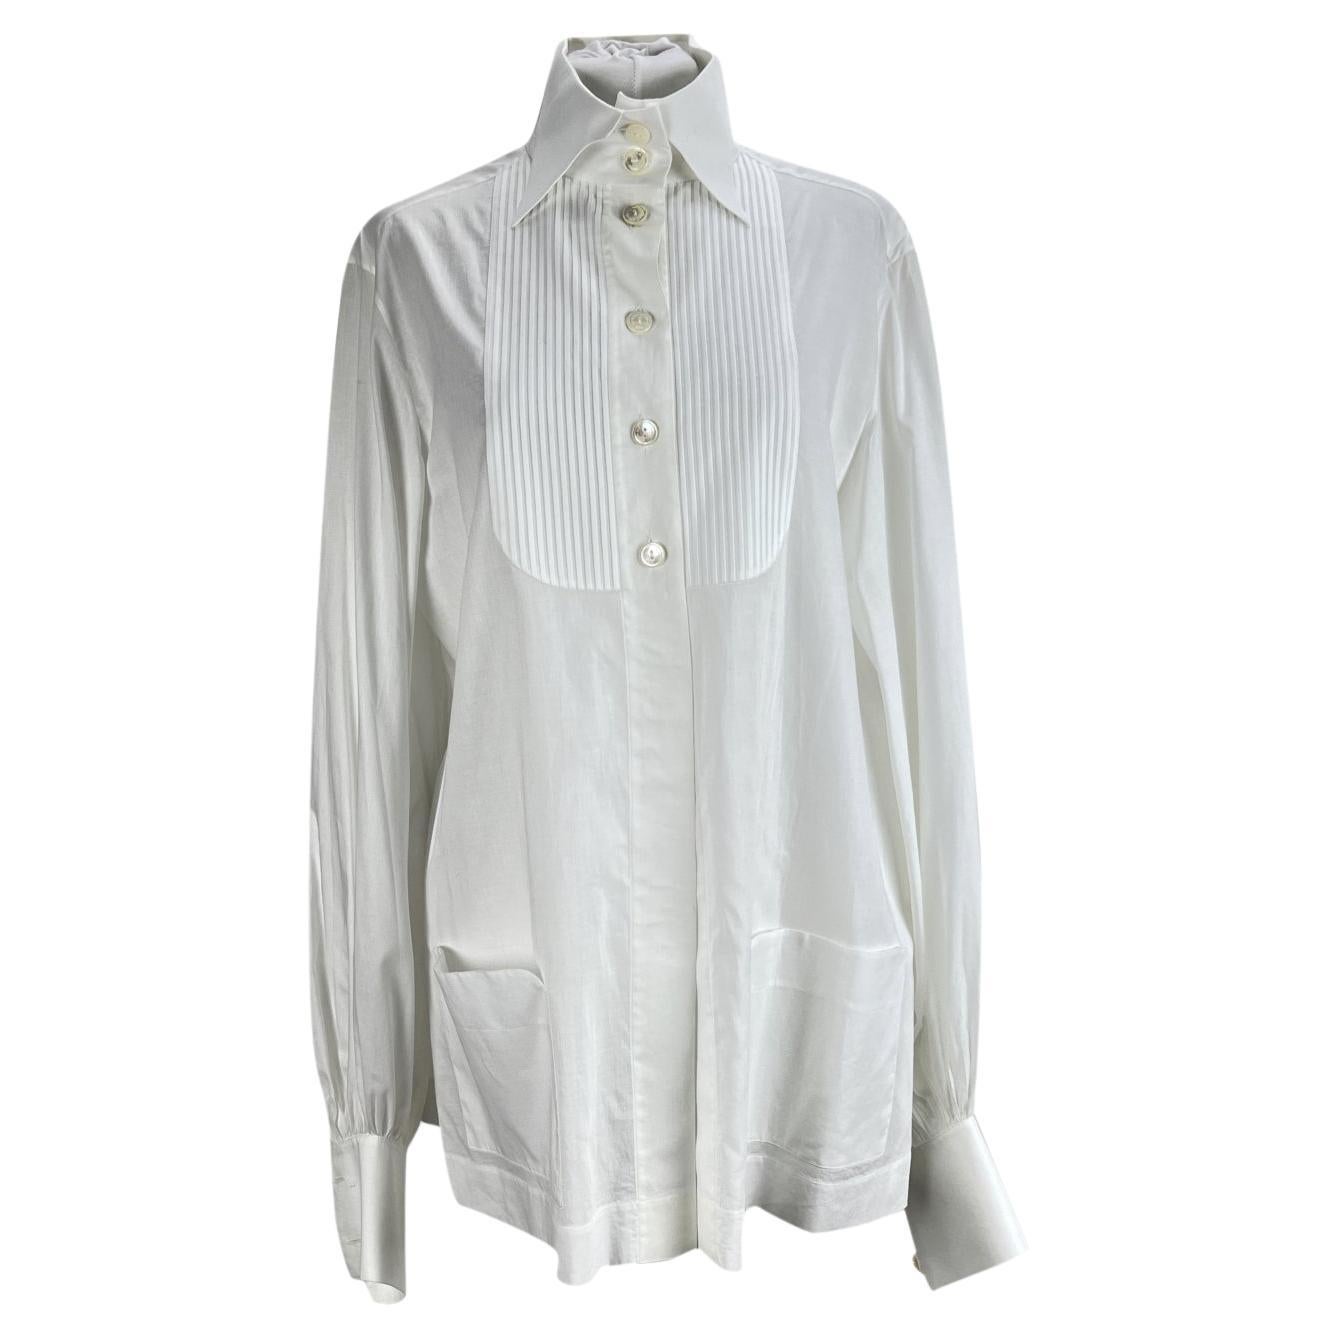 Chanel White Pintucked Cotton Shirt Blouse Size 38 FR